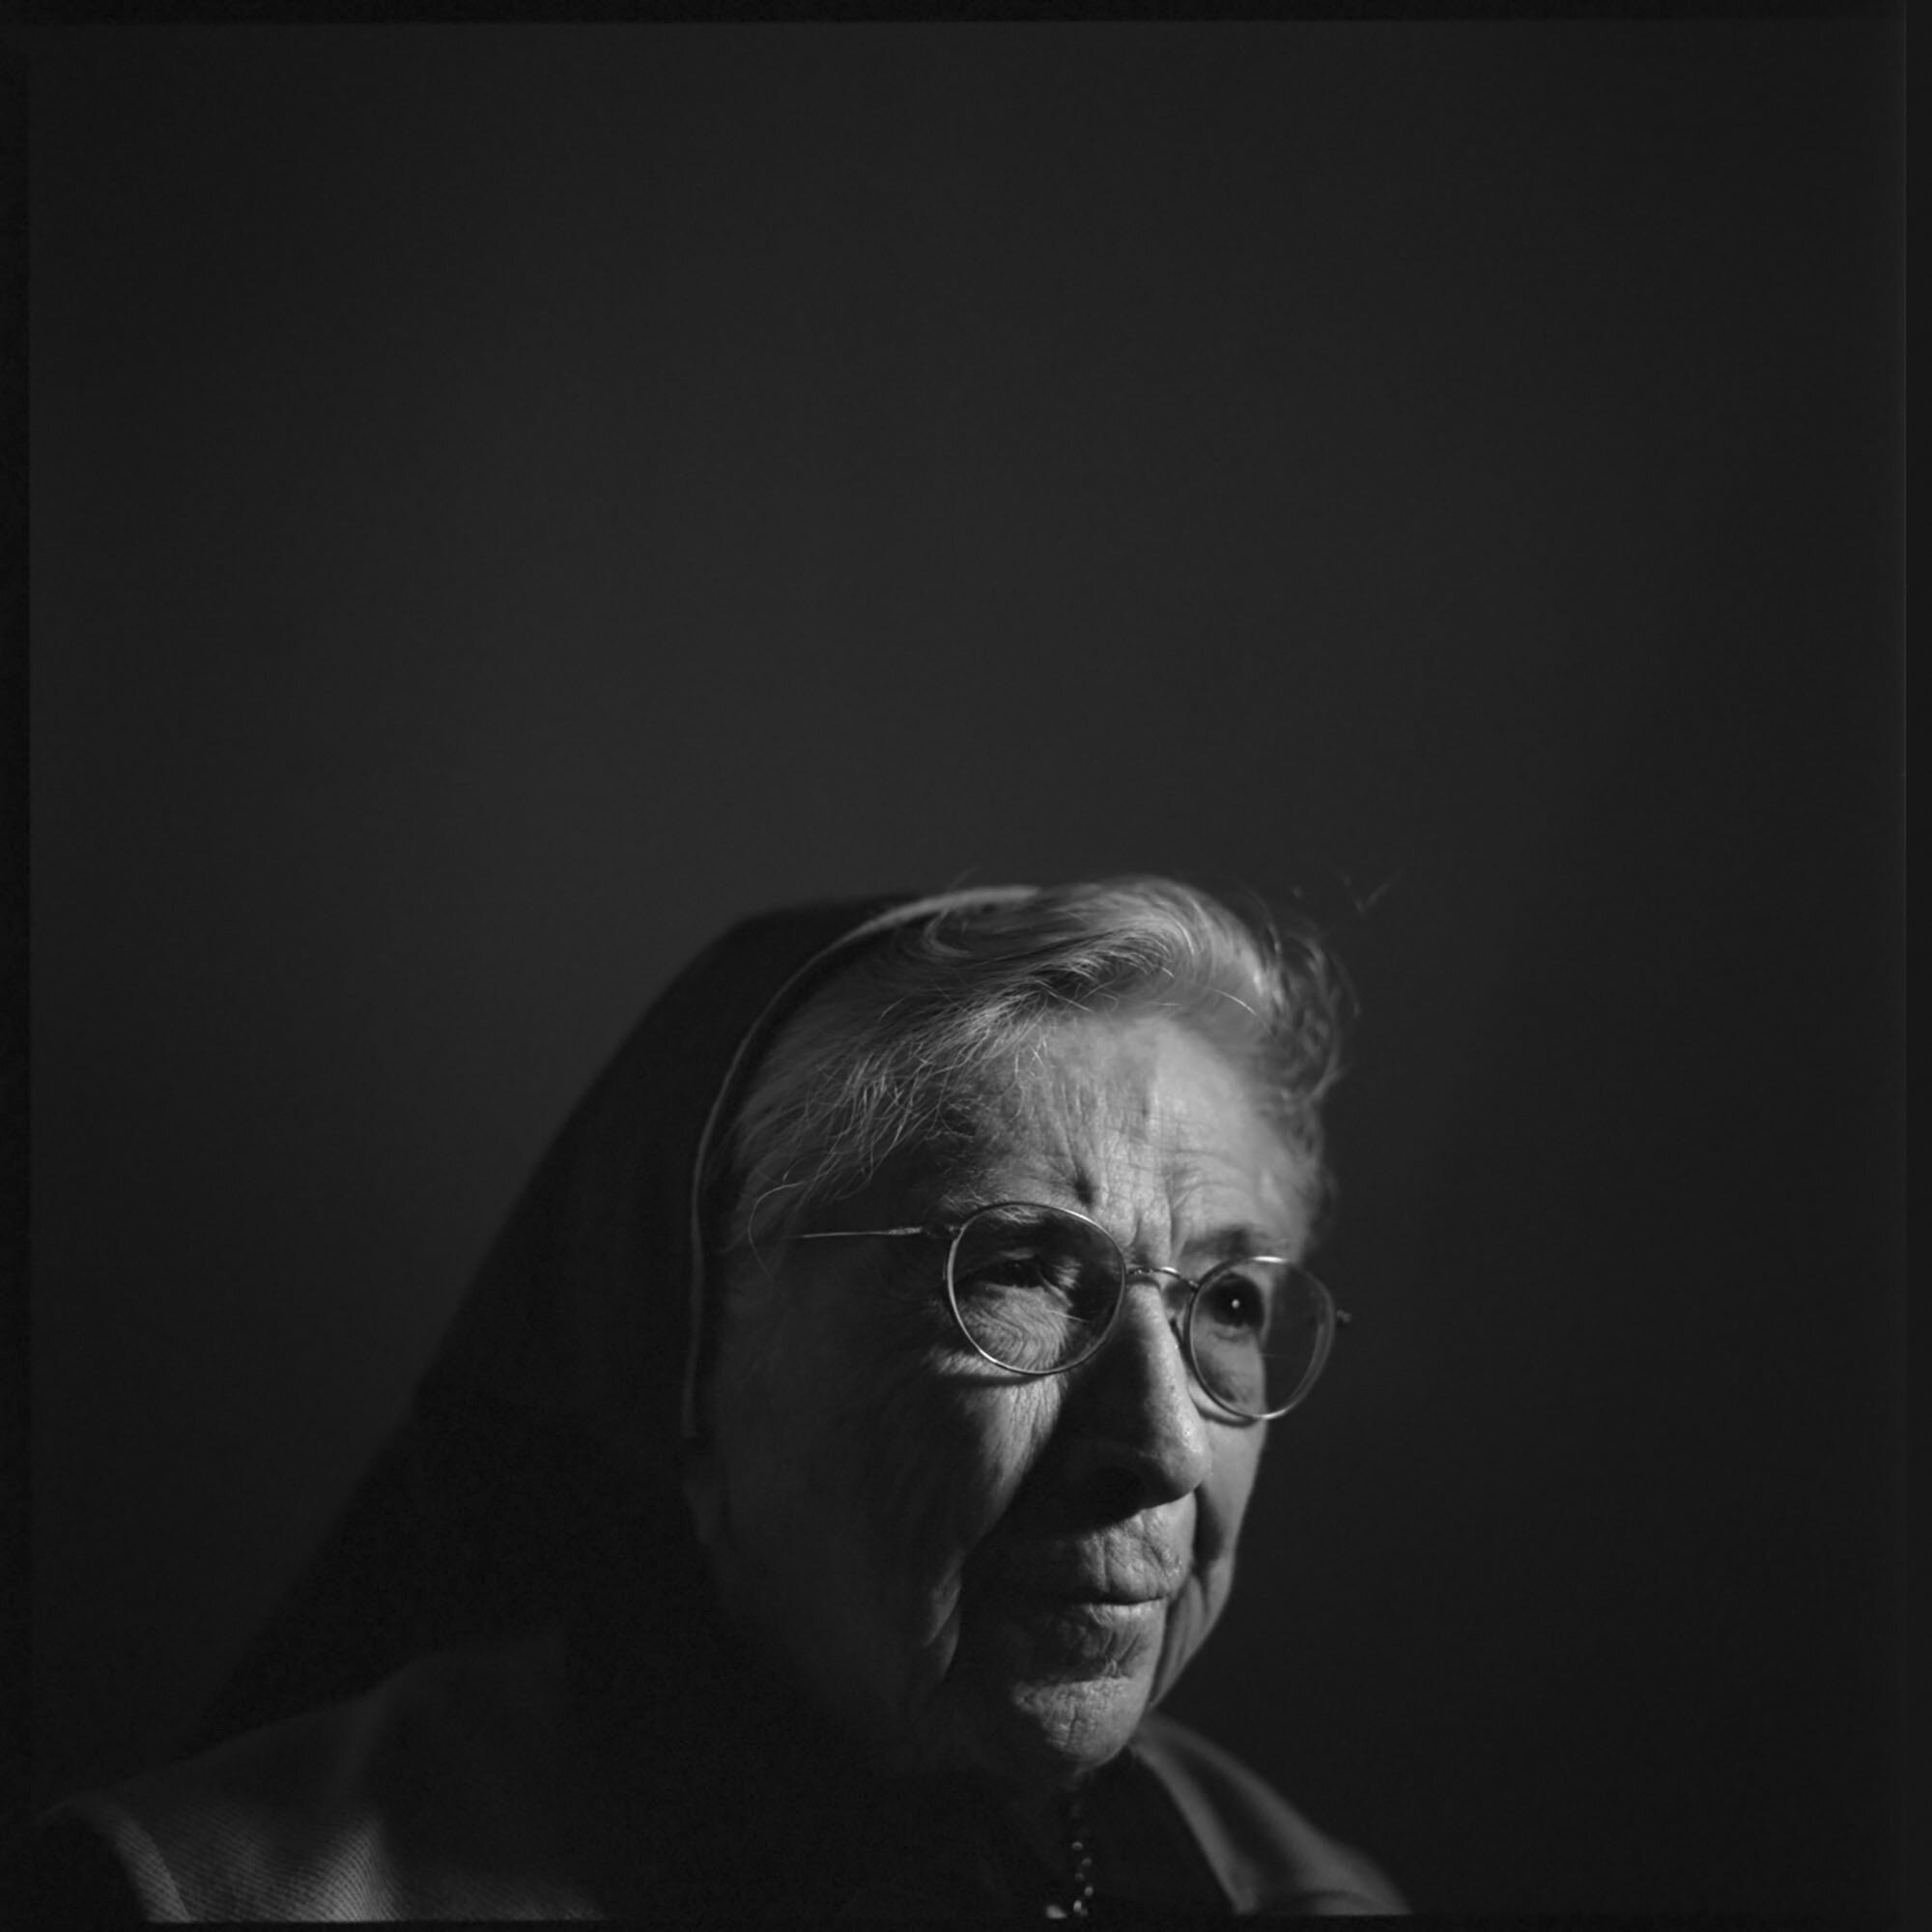  Sr. Paulita Hoffman Arrested during the communist era in China in 1950 where she was put under house arrest for 14 months under conditions of fear, malnourishment, and abuse. During the public trial in the town square, Sr. Paulita's habit was pulled